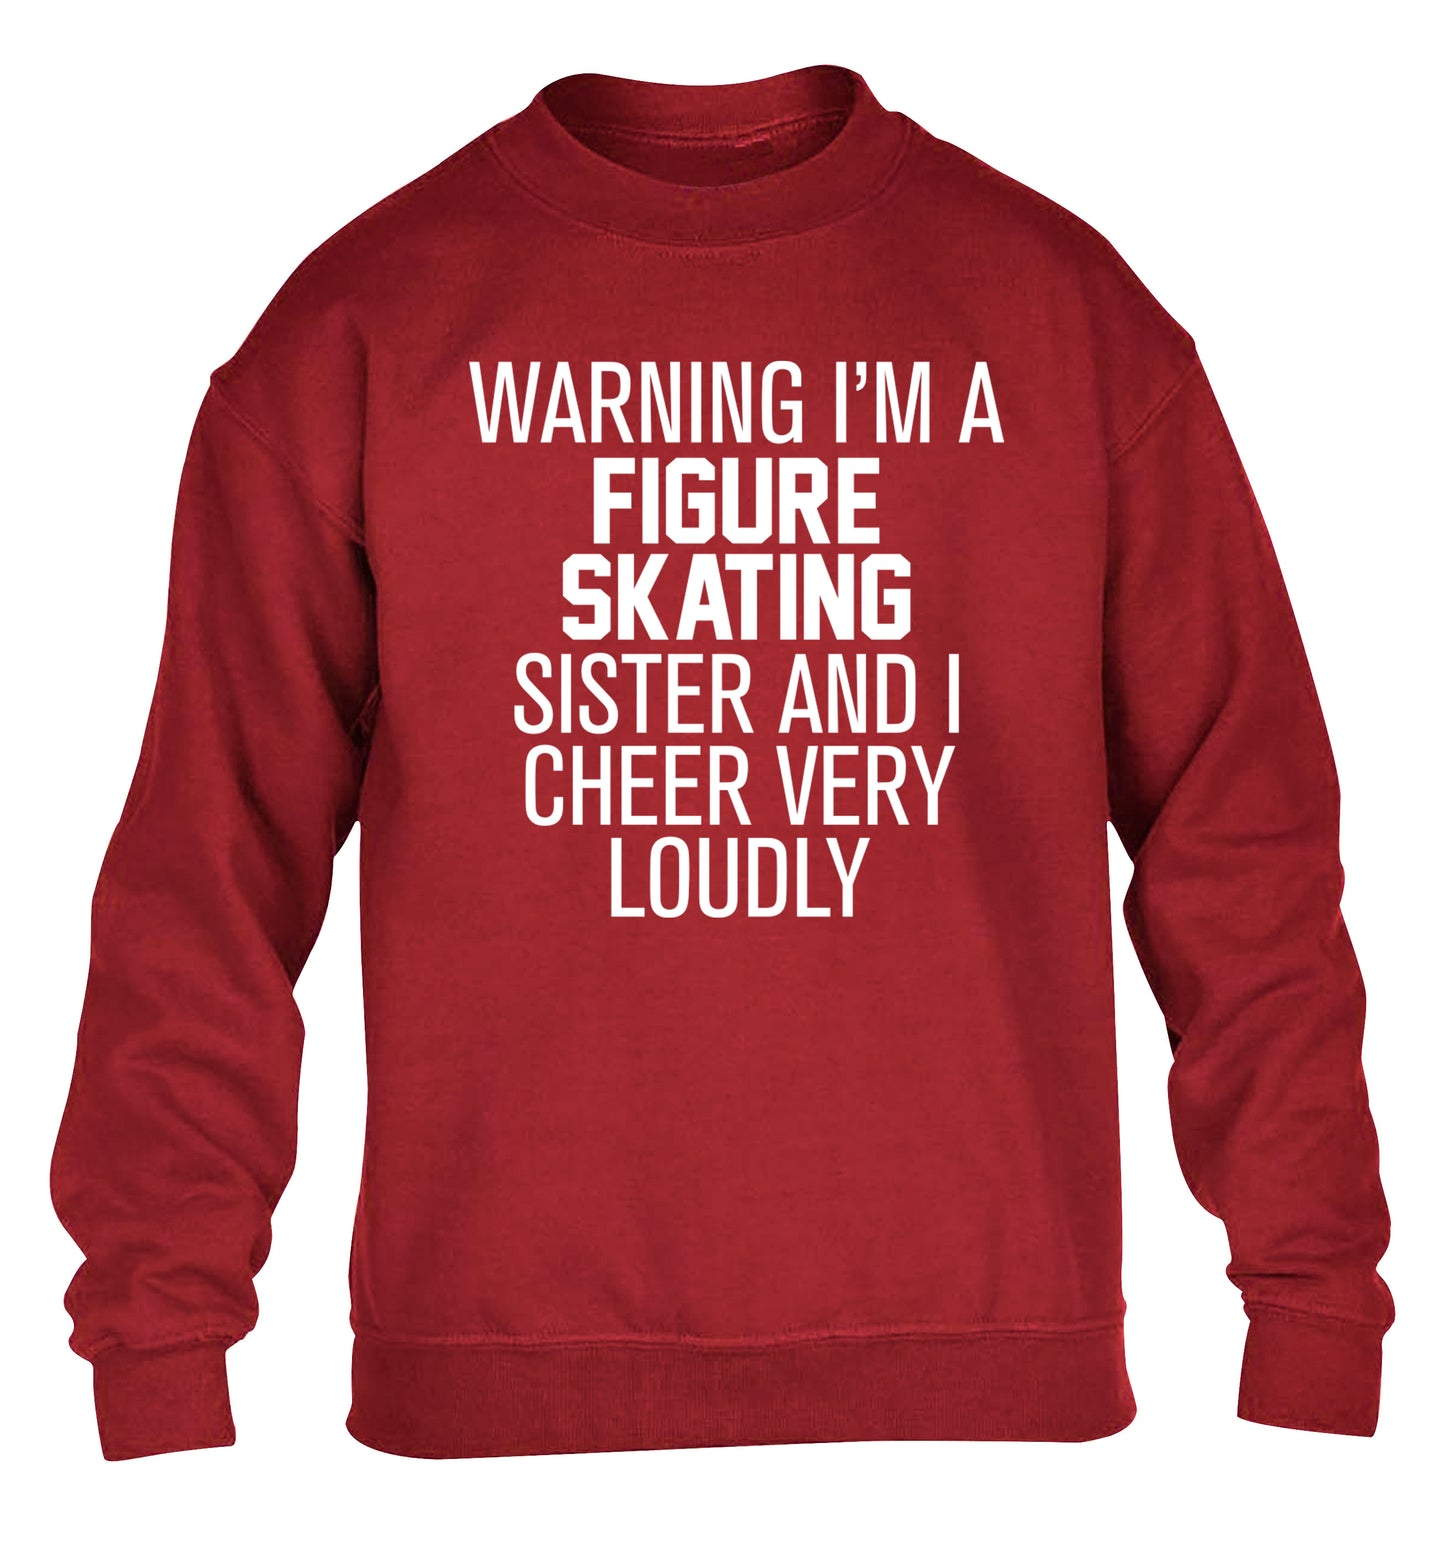 Warning I'm a figure skating sister and I cheer very loudly children's grey sweater 12-14 Years